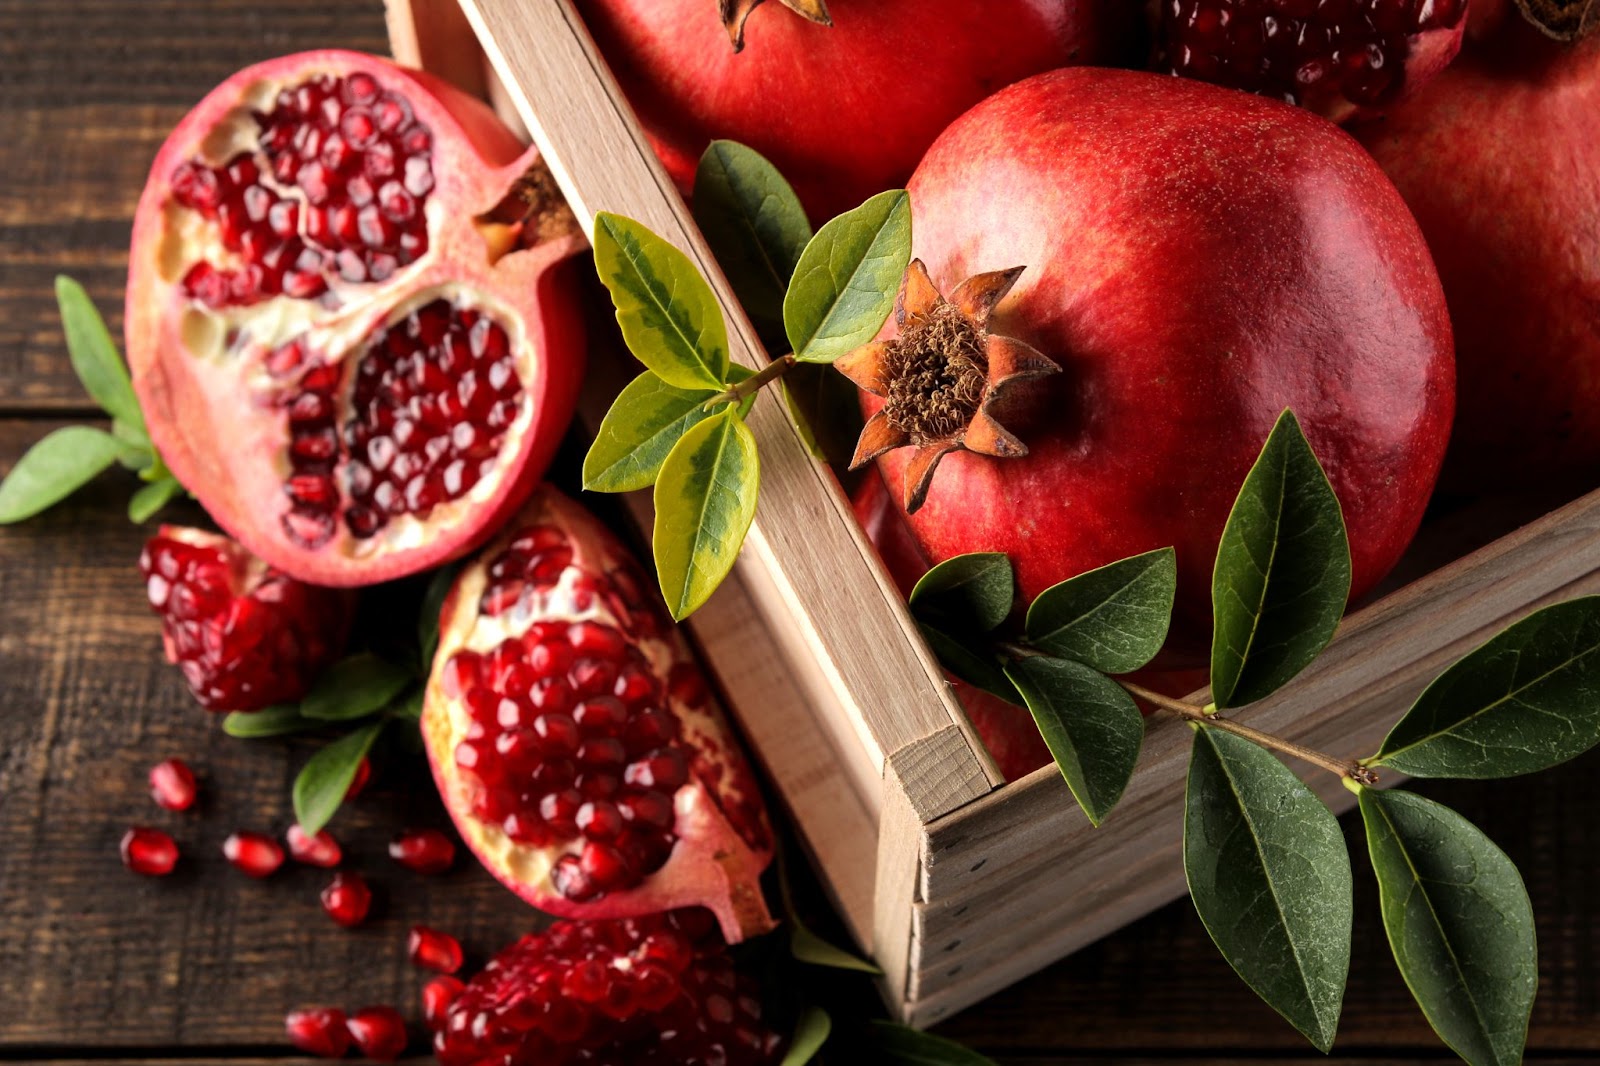 Pomegranate fruit in a wooden box.